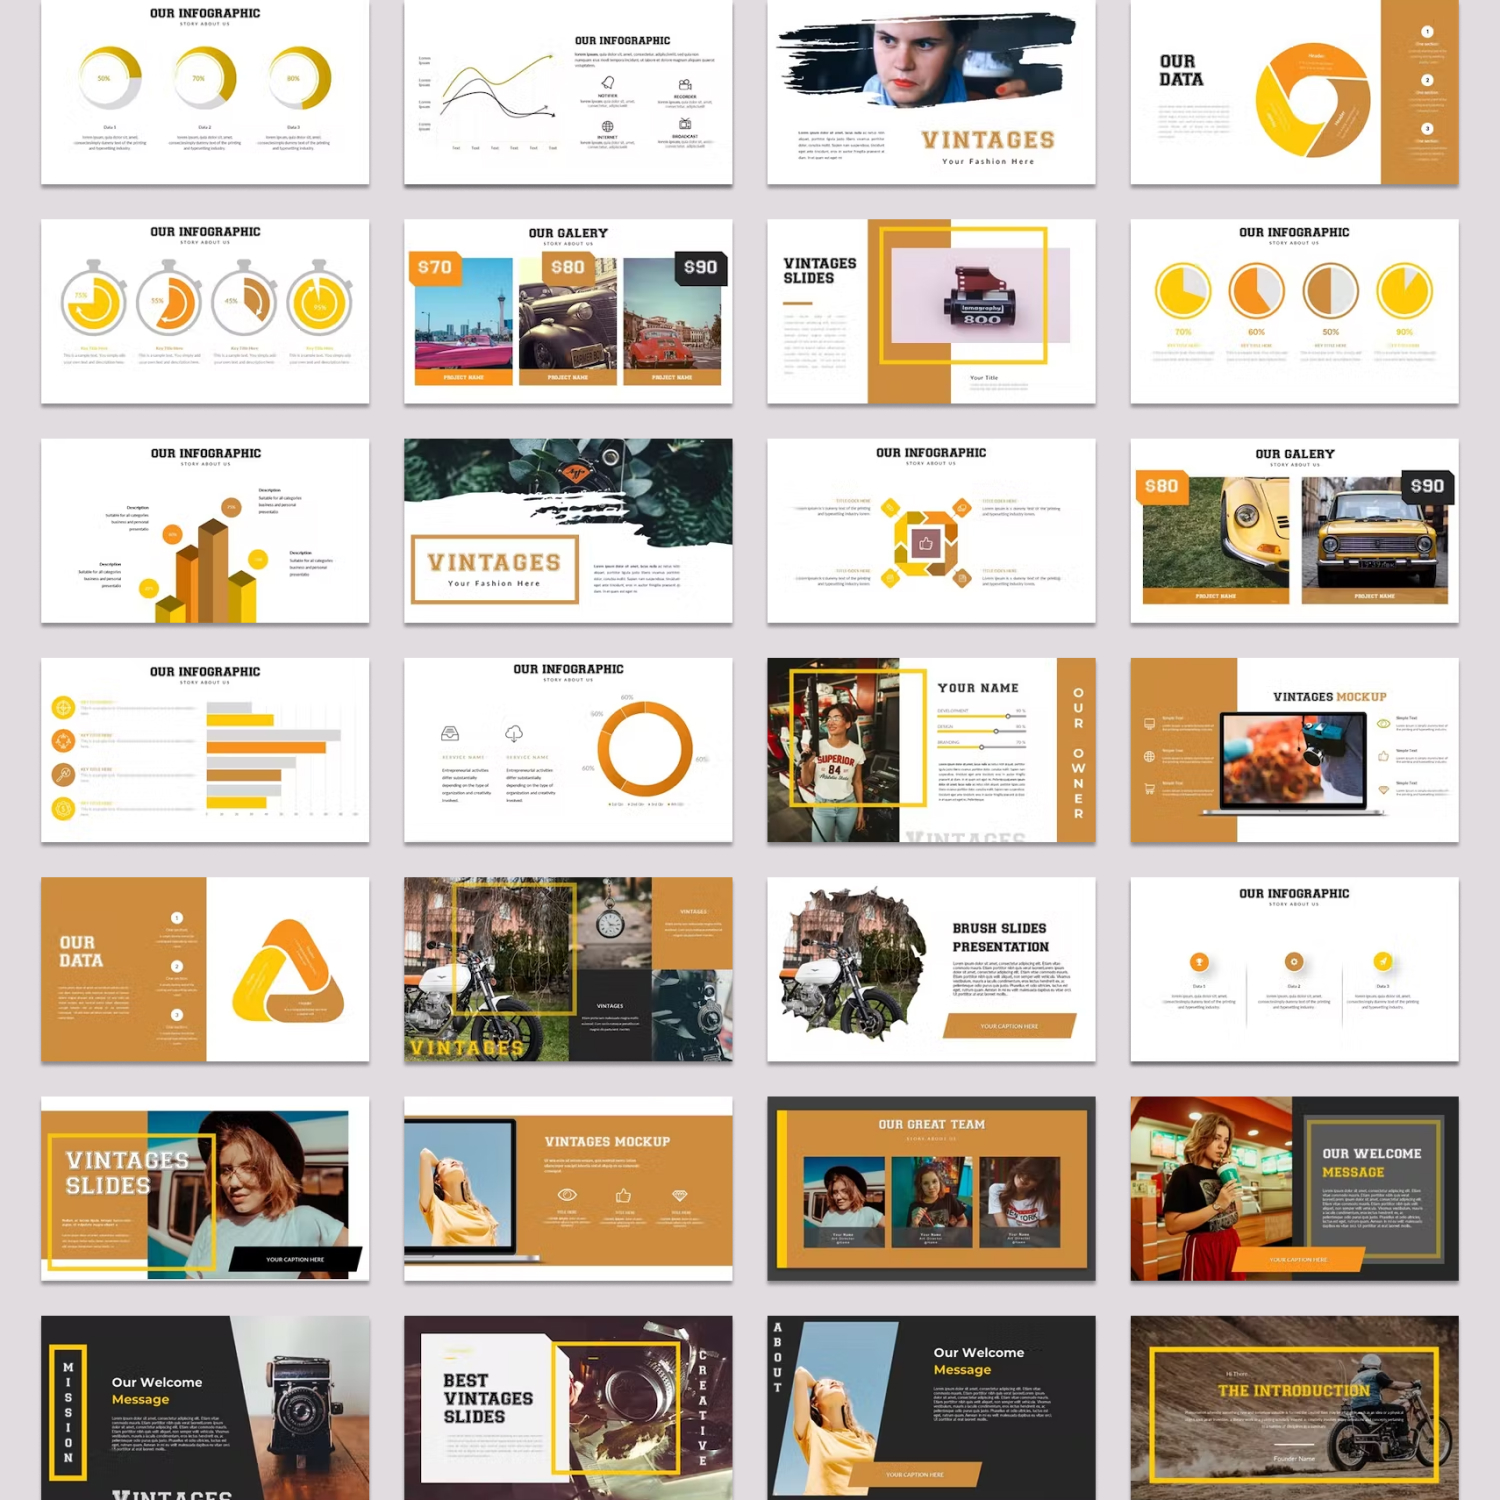 Preview vintages powerpoint template.